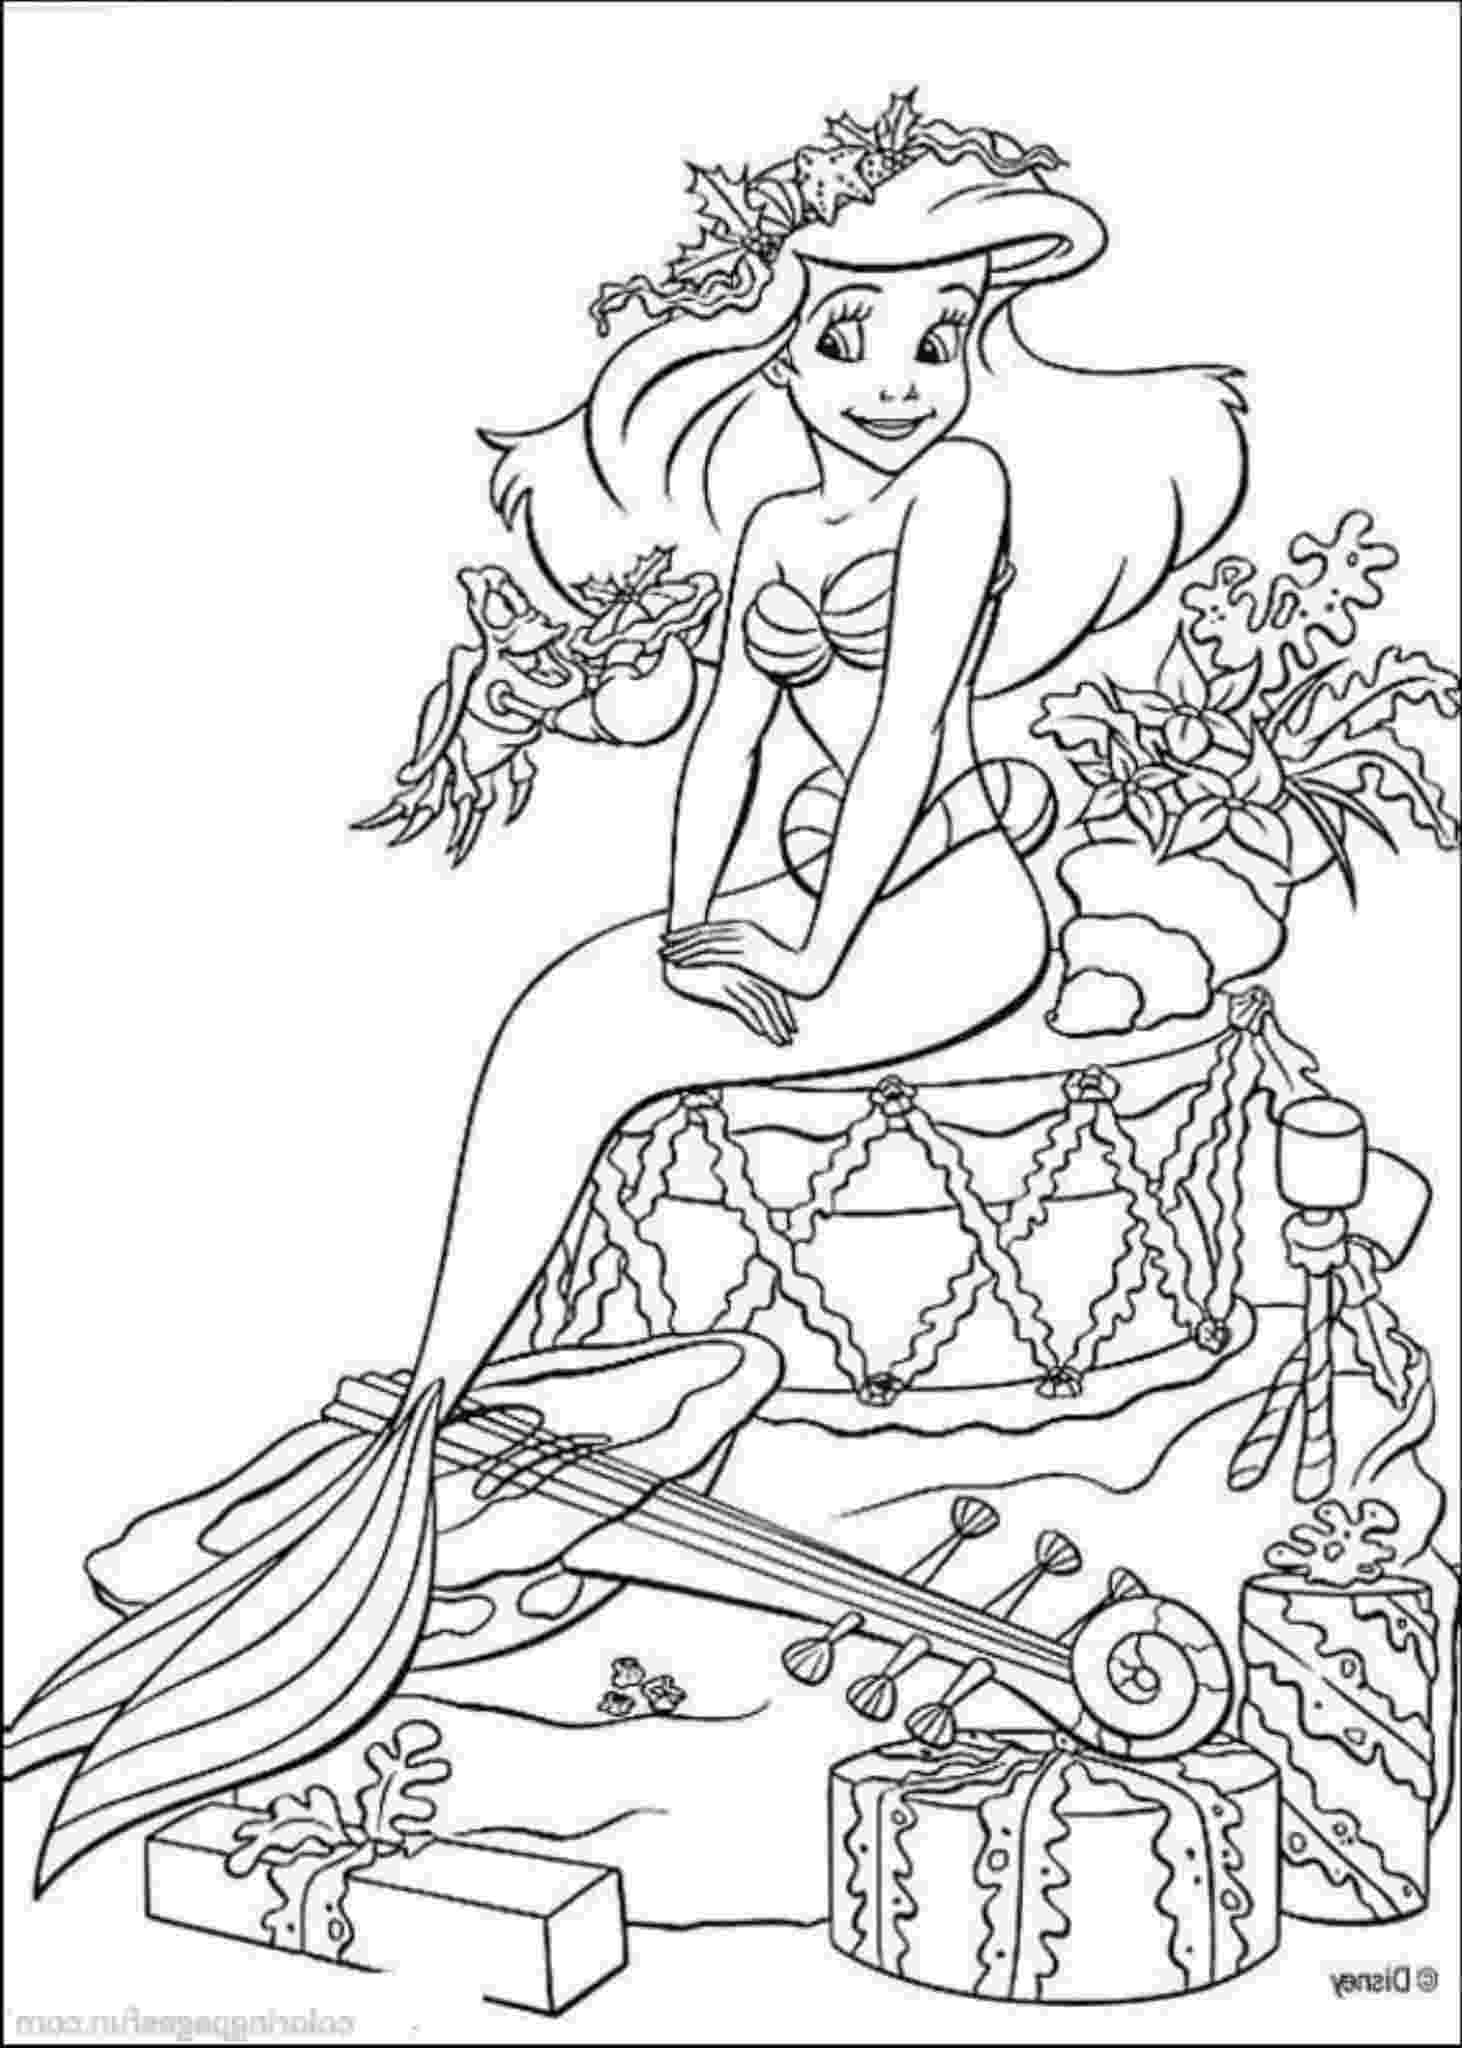 little mermaid color pages print download find the suitable little mermaid mermaid pages color little 